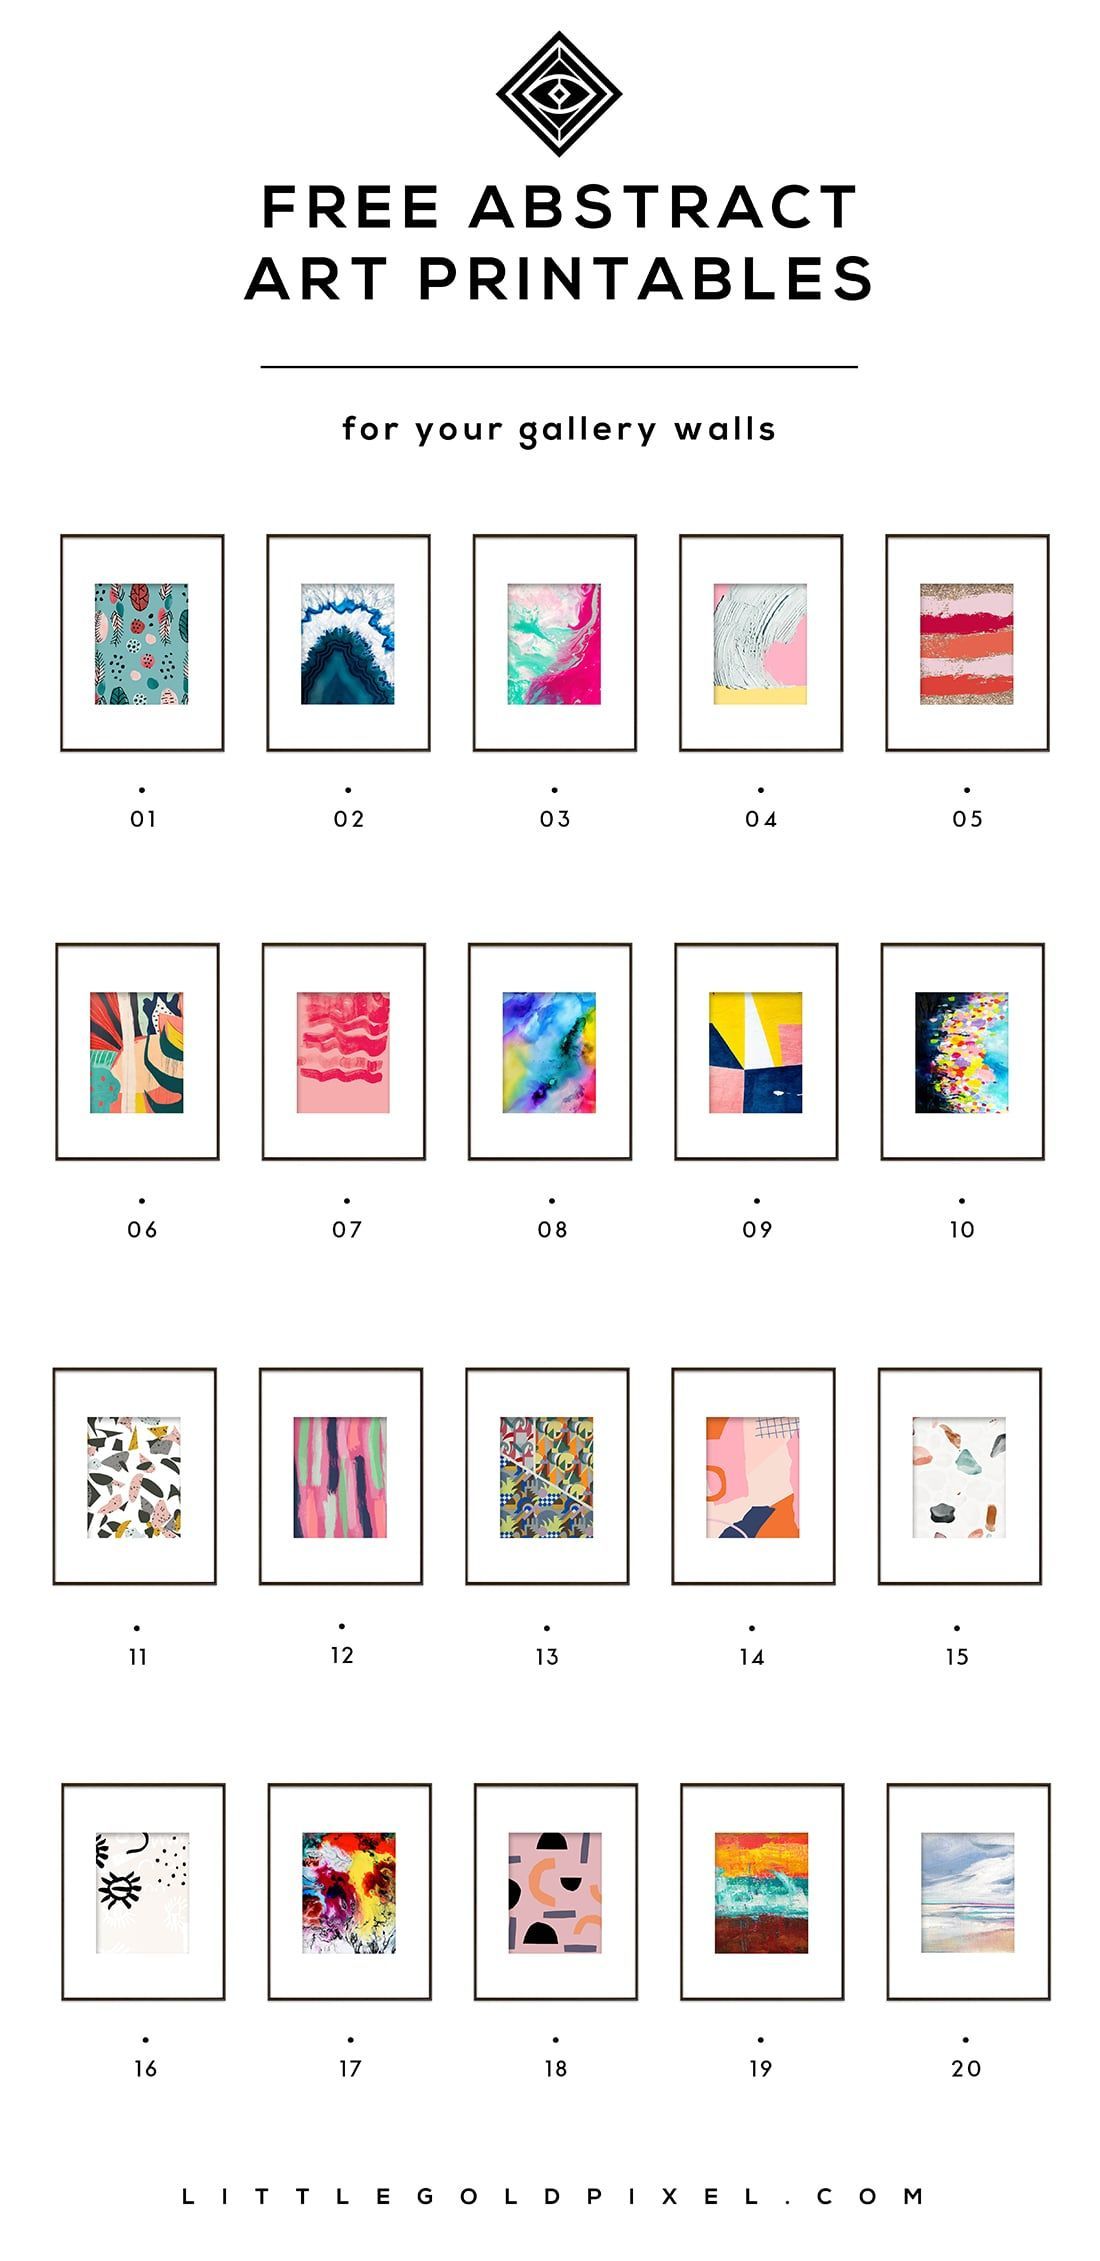 20 Free Abstract Art Printables for Your Gallery Walls • Little Gold Pixel - 20 Free Abstract Art Printables for Your Gallery Walls • Little Gold Pixel -   18 diy Art prints ideas